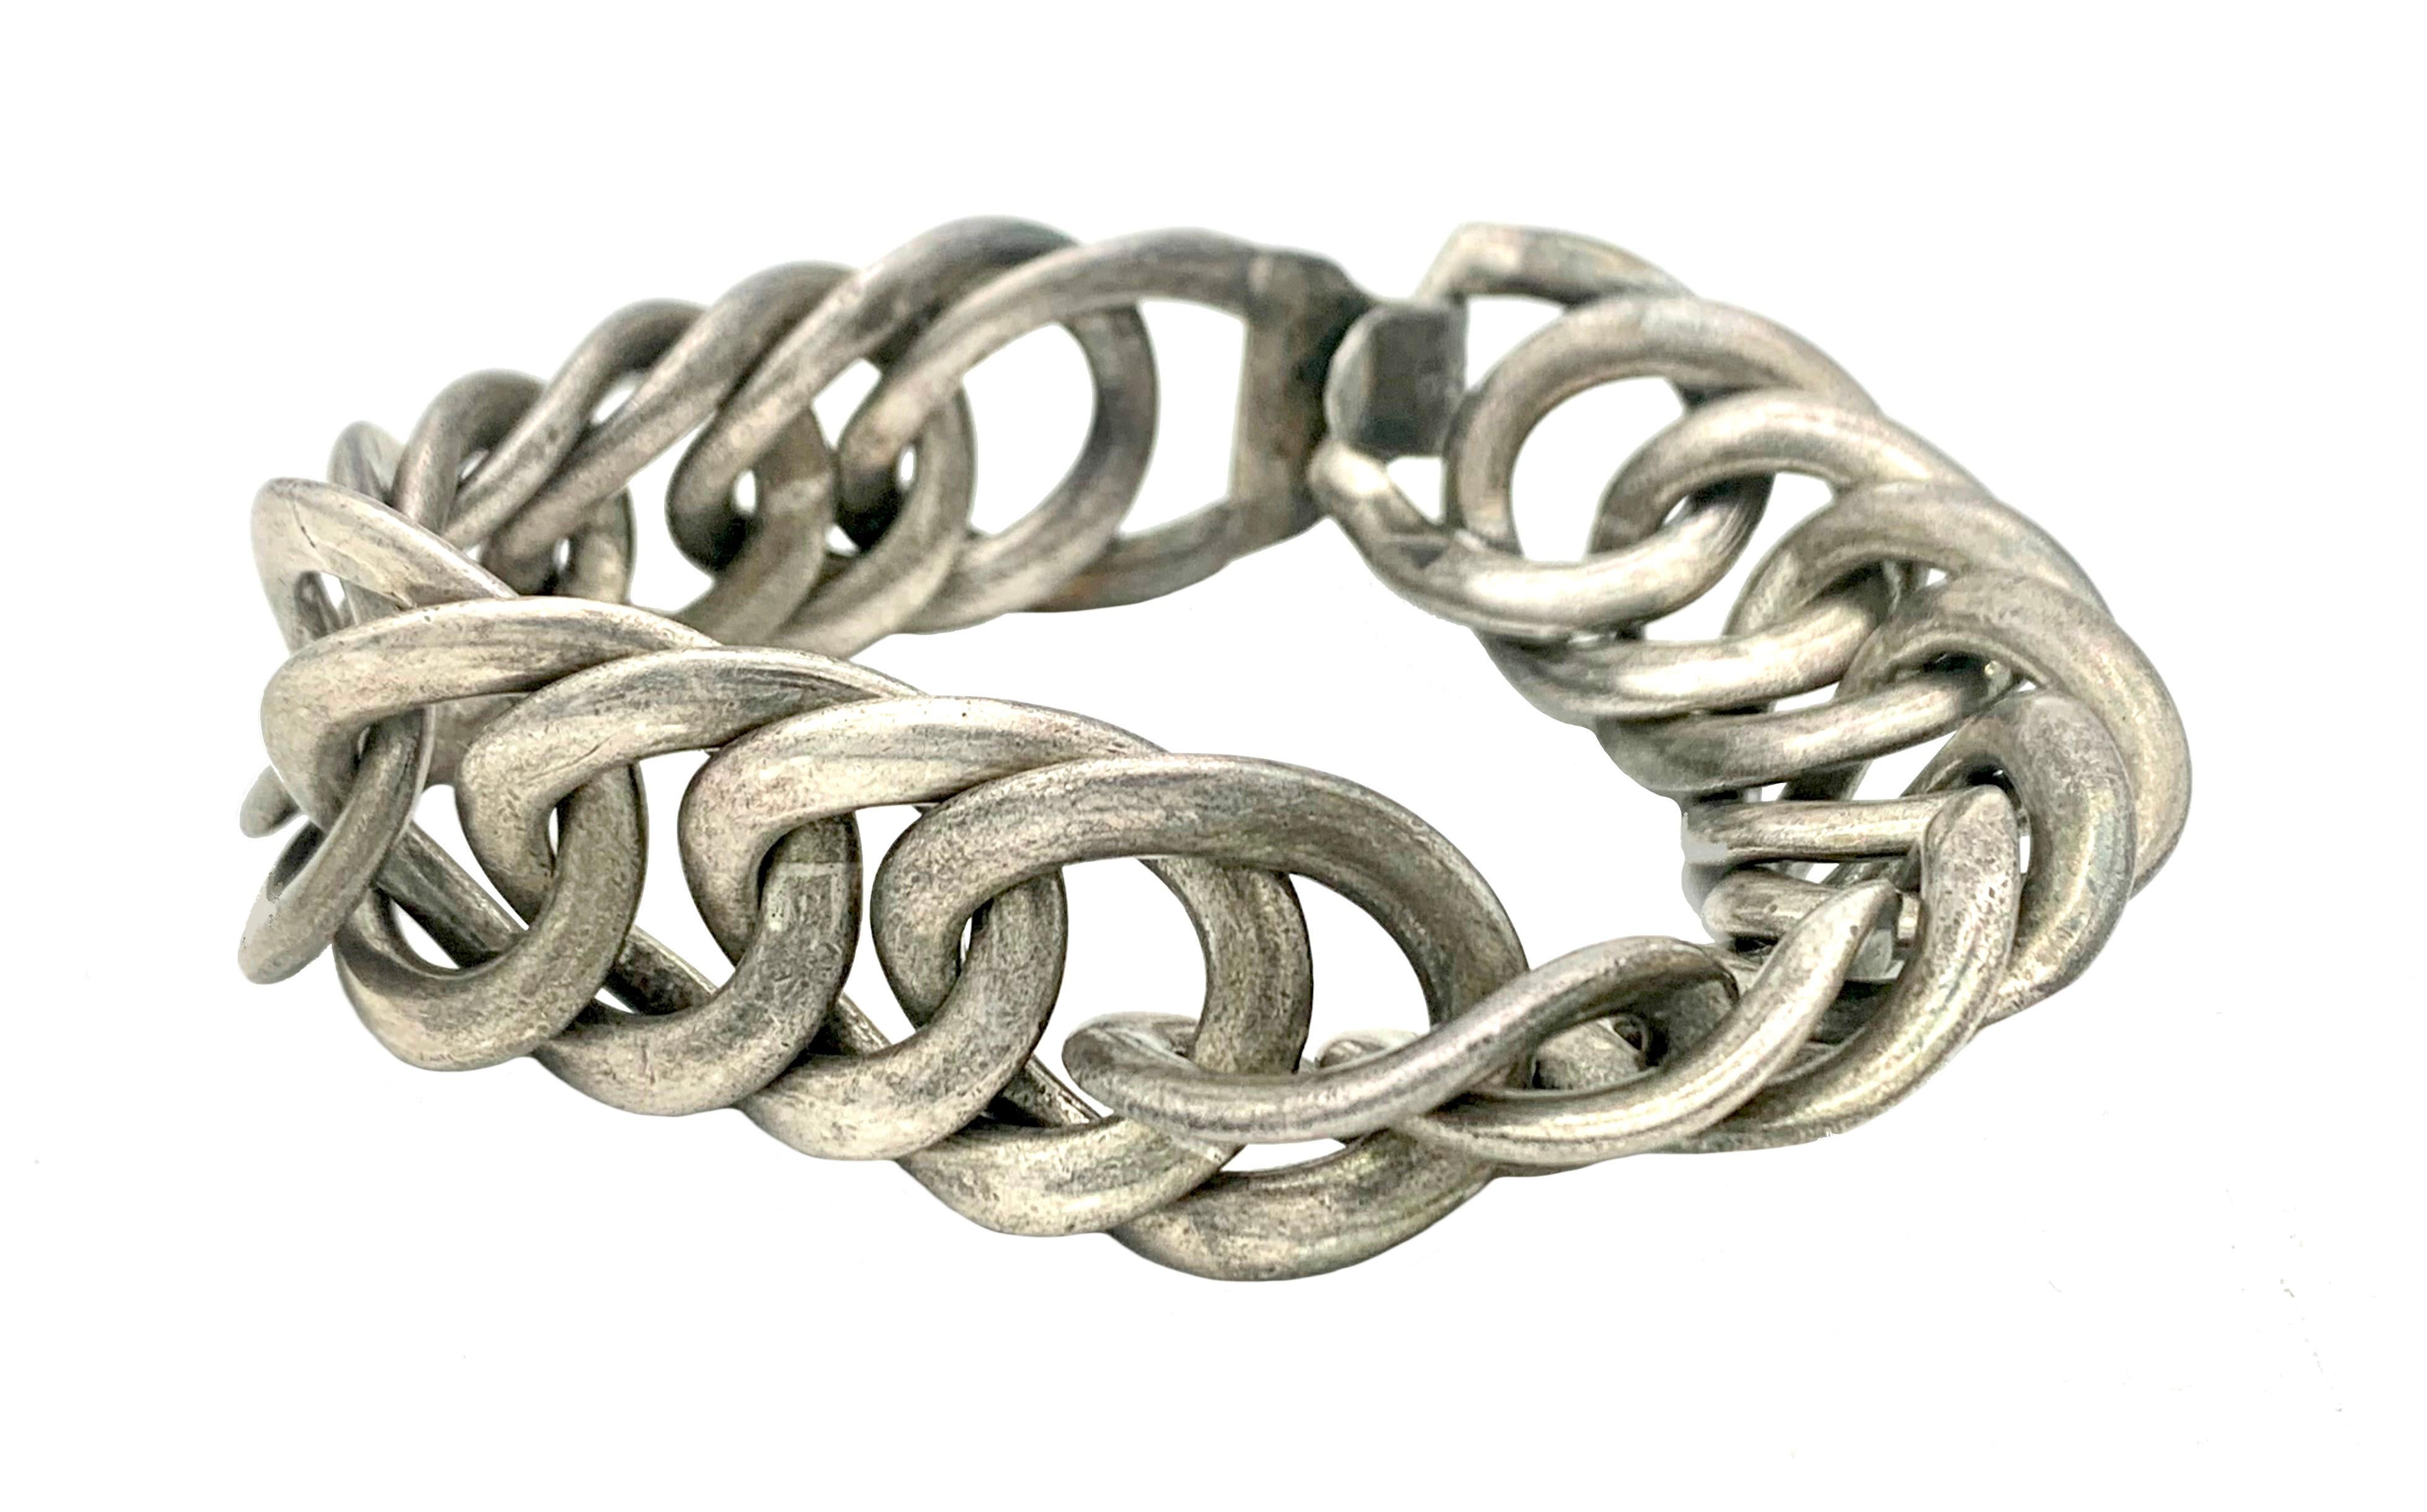 This solid flexible link bracelet was created by William Spratling in the Mid-20th century in Mexico.
It is made out of sterling silver and carries full hallmarks and makers mark. The makers mark was in use from 1940-1946 ca.